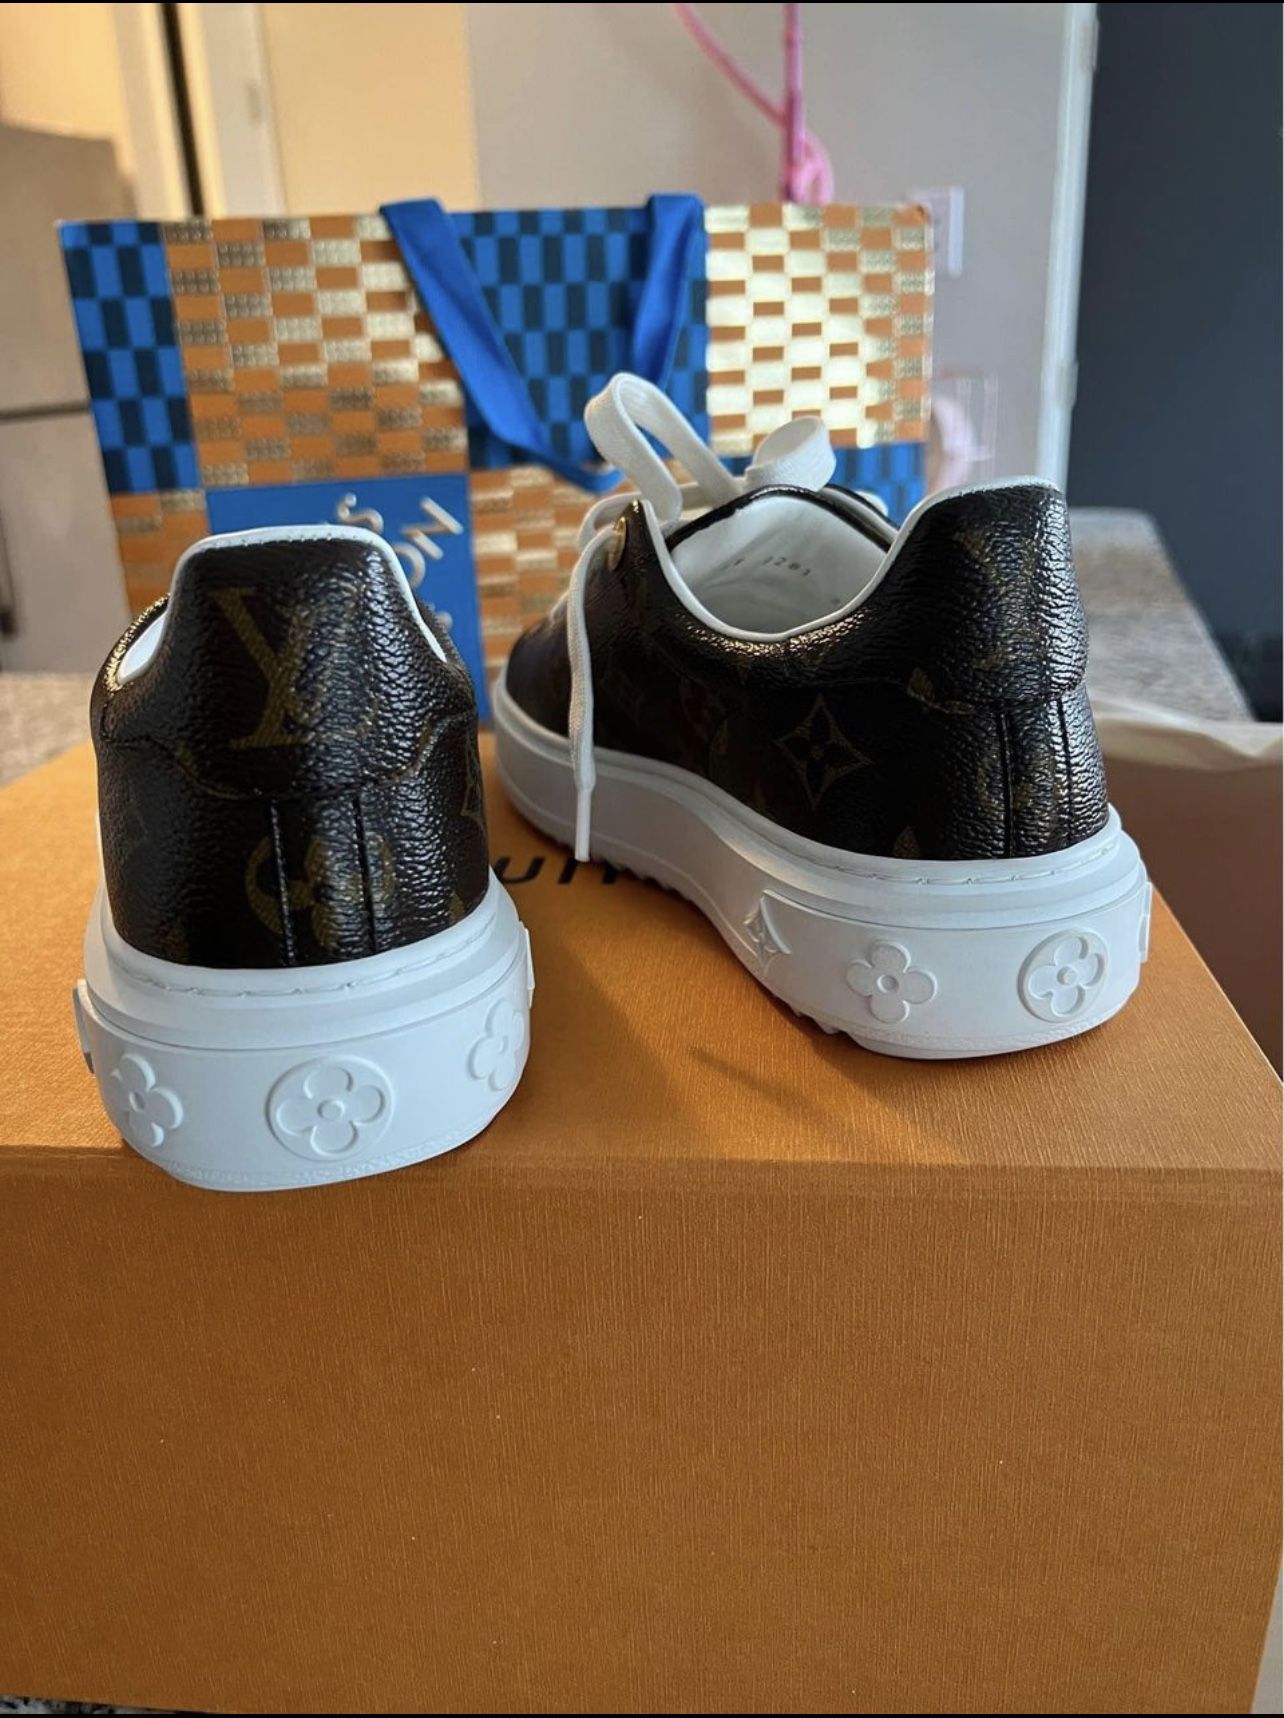 Authentic Louis Vuitton Shoes With Box and Copy Of Receipt